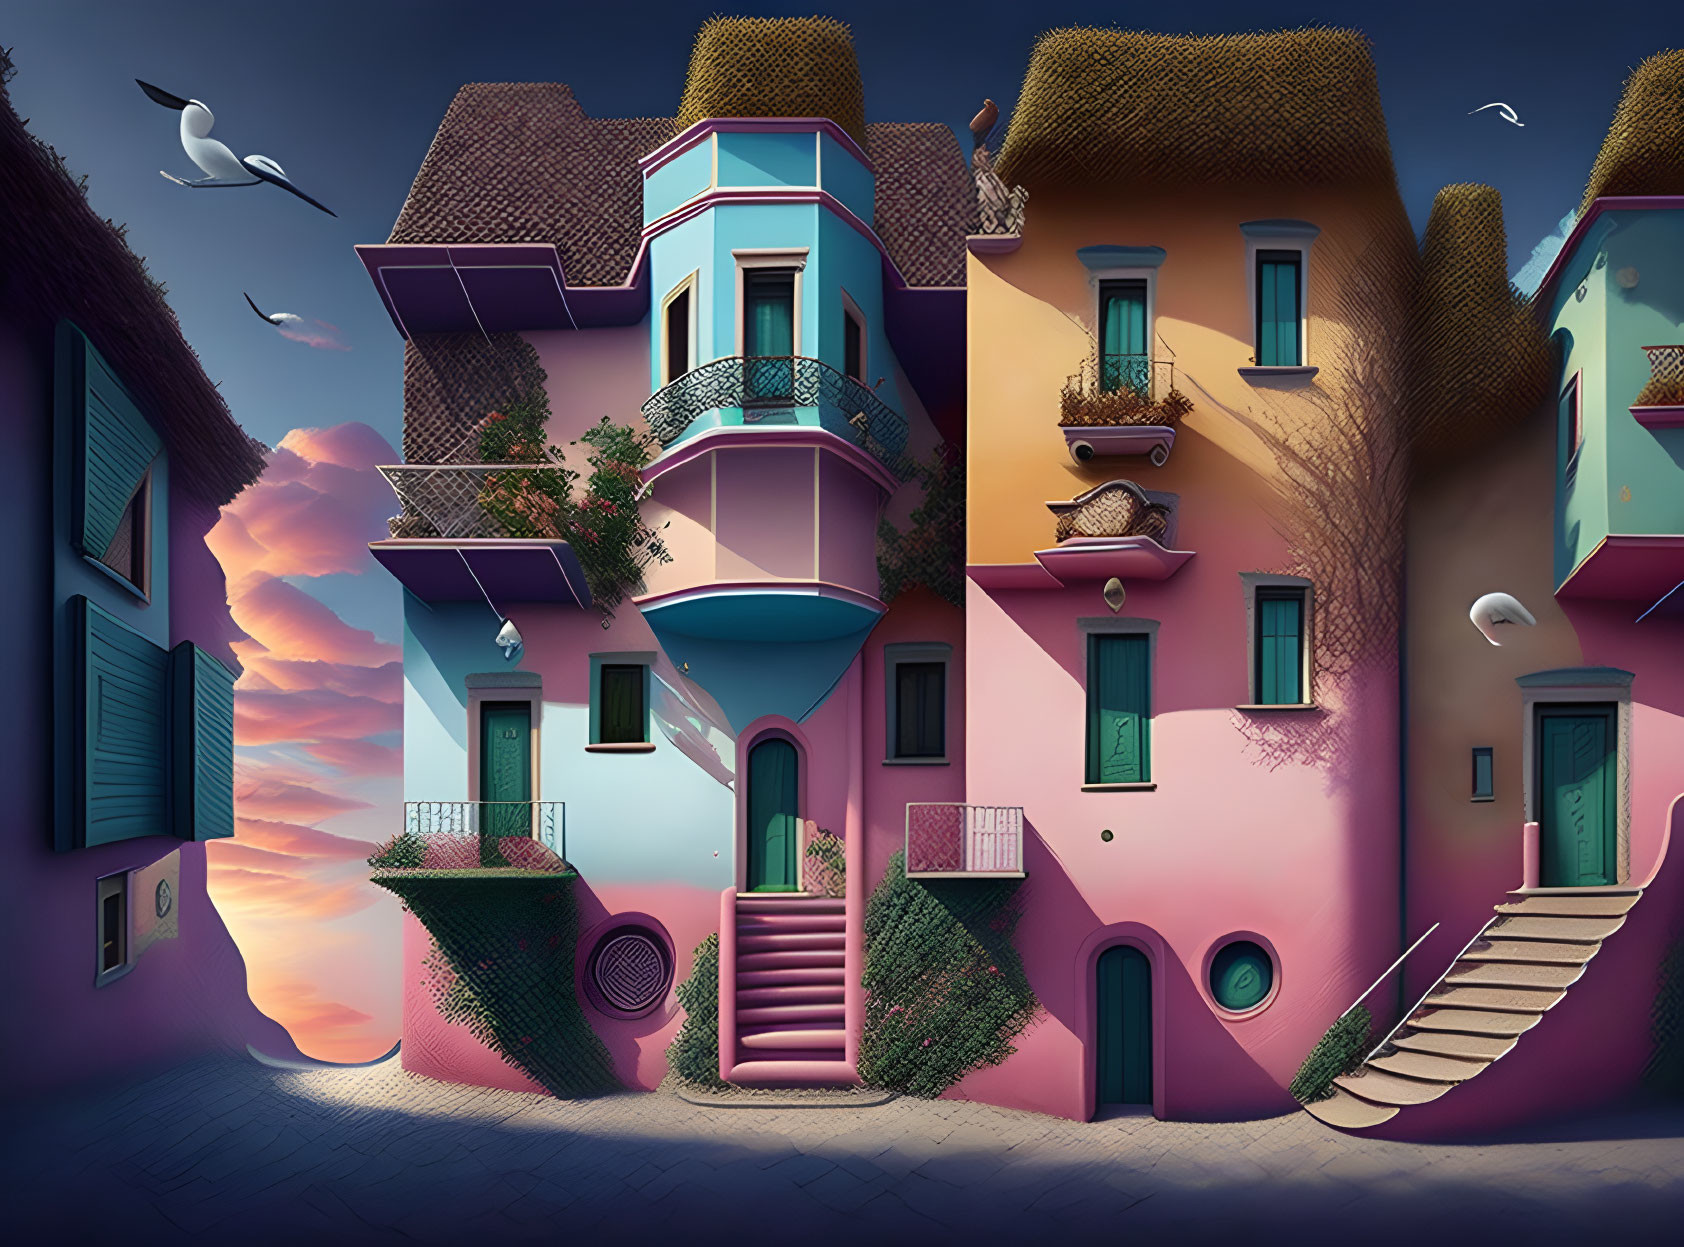 Colorful Curved Buildings with Surreal Elements Under Dusky Sky